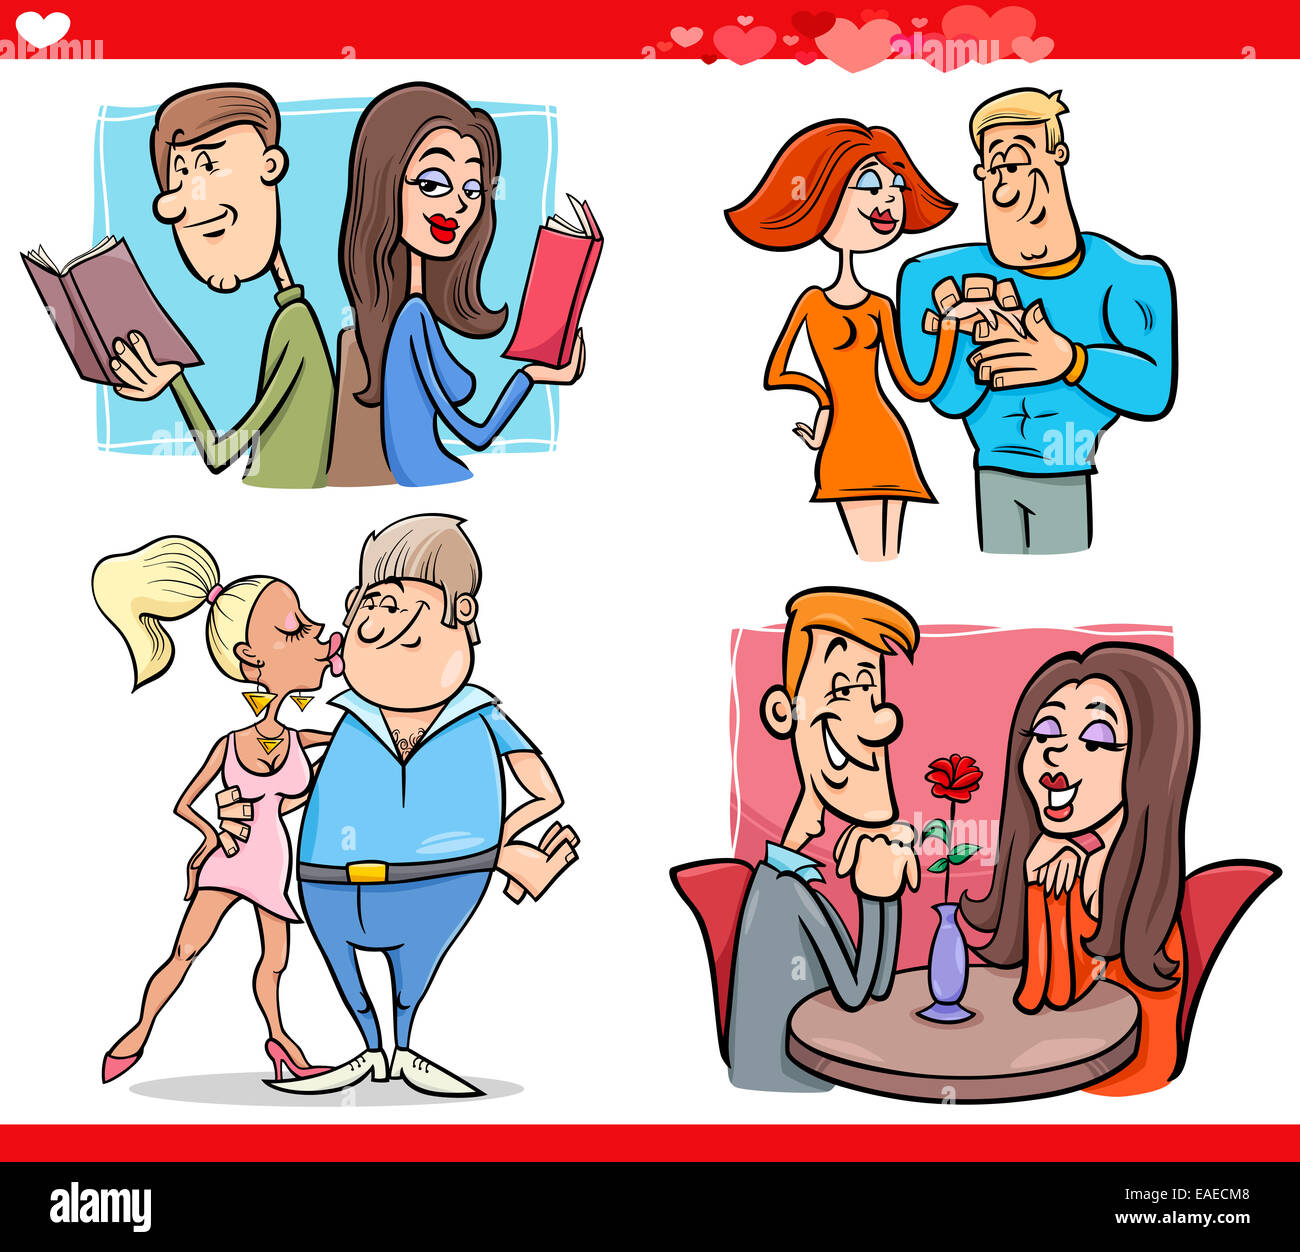 Cartoon Illustration of Happy Couples in Love on Valentines Day or Valentine Cards Stock Photo